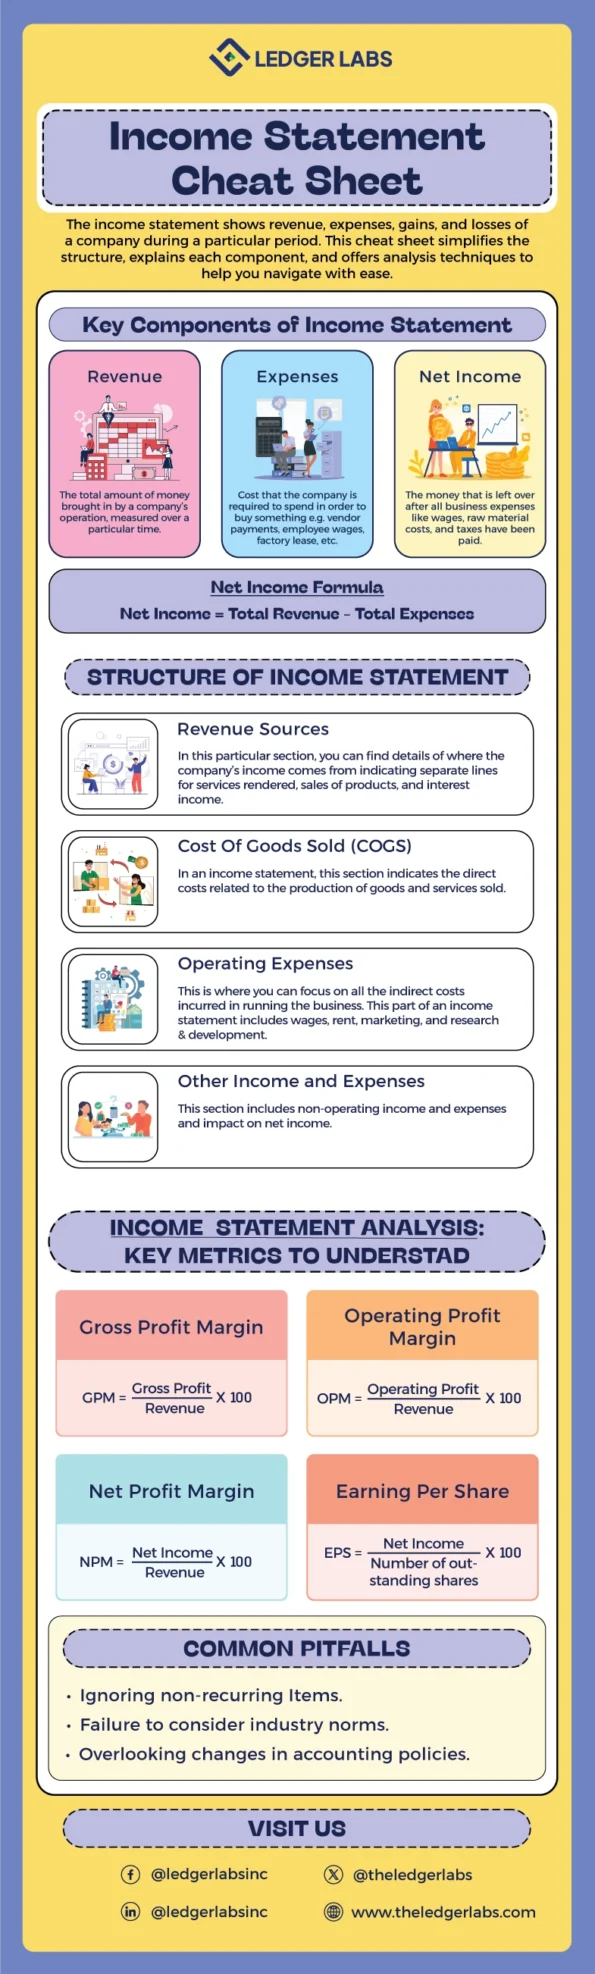 Income Statement Cheat Sheet infographic